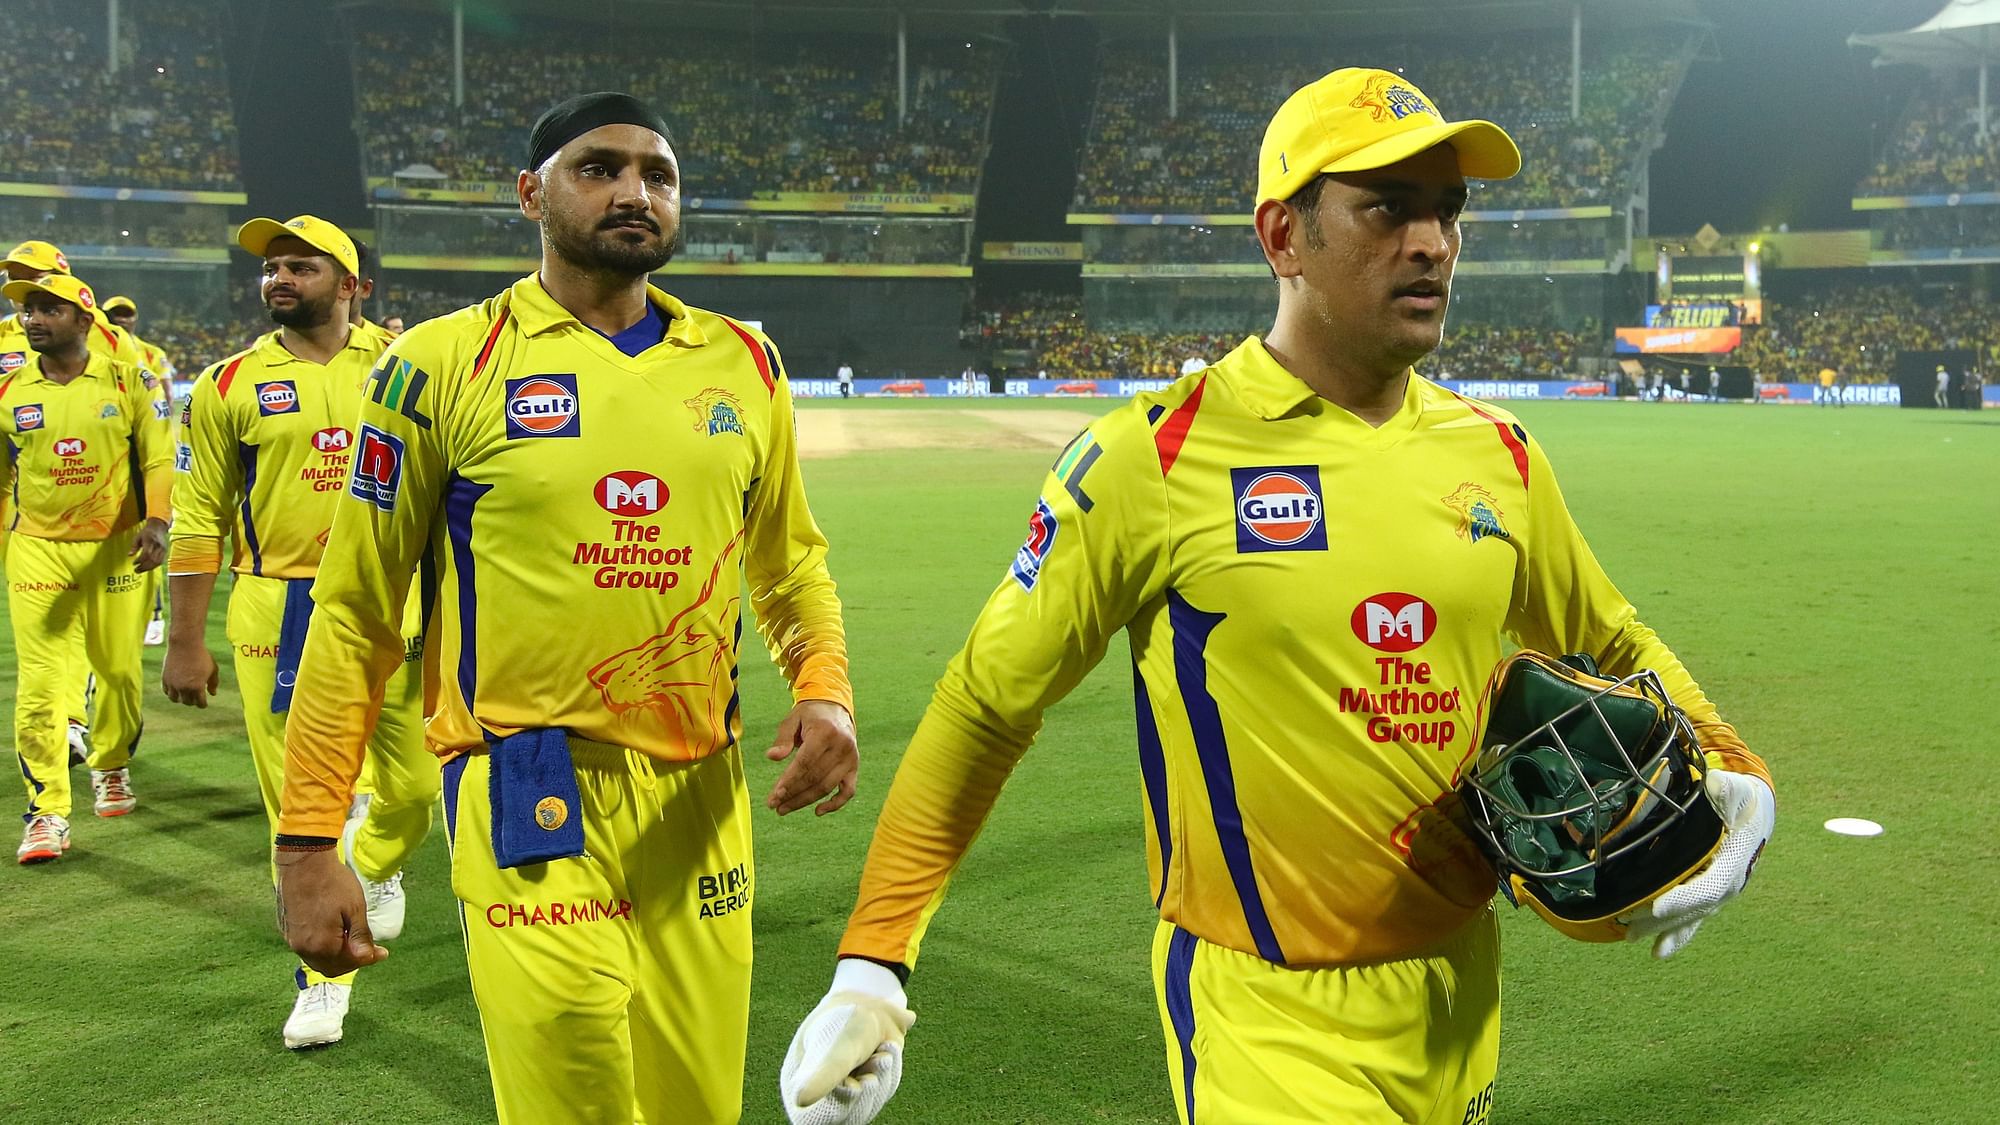 With nine wins from 14 games, Chennai Super Kings finished second on the points table.